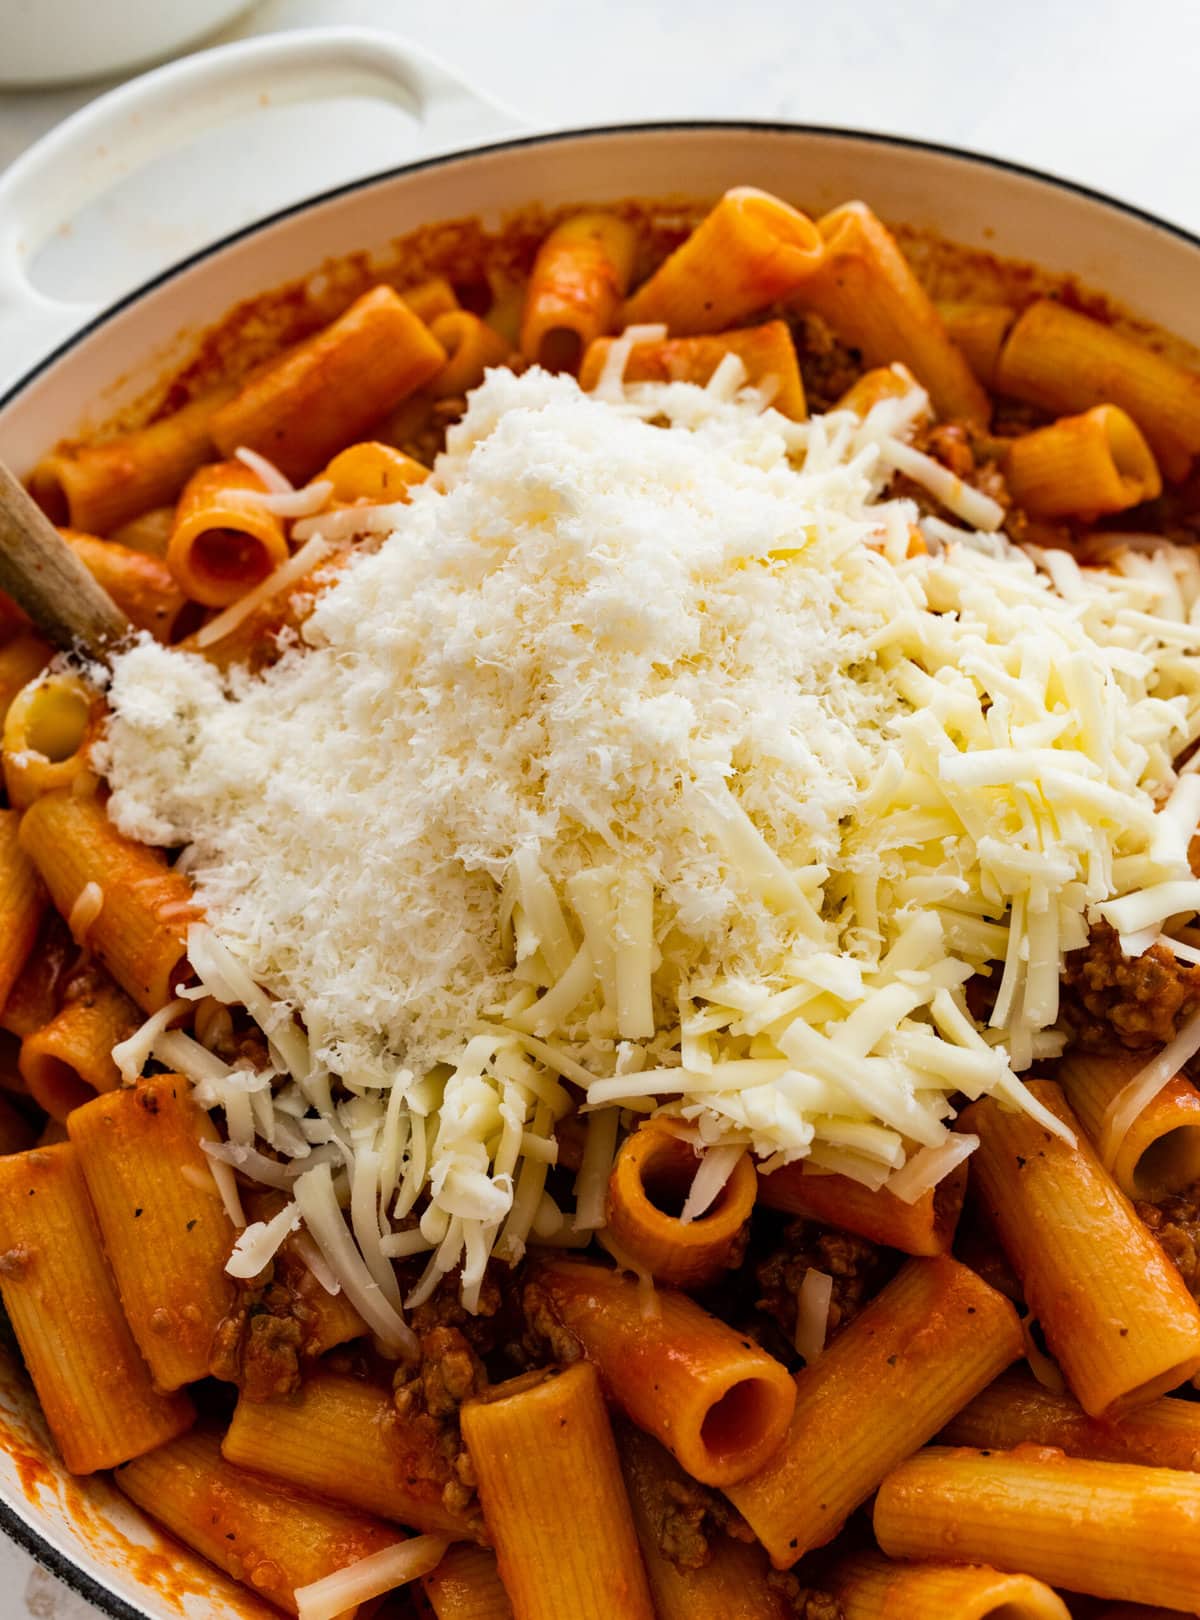 How to make classic pasta al forno step-by-step: add half of the cheese